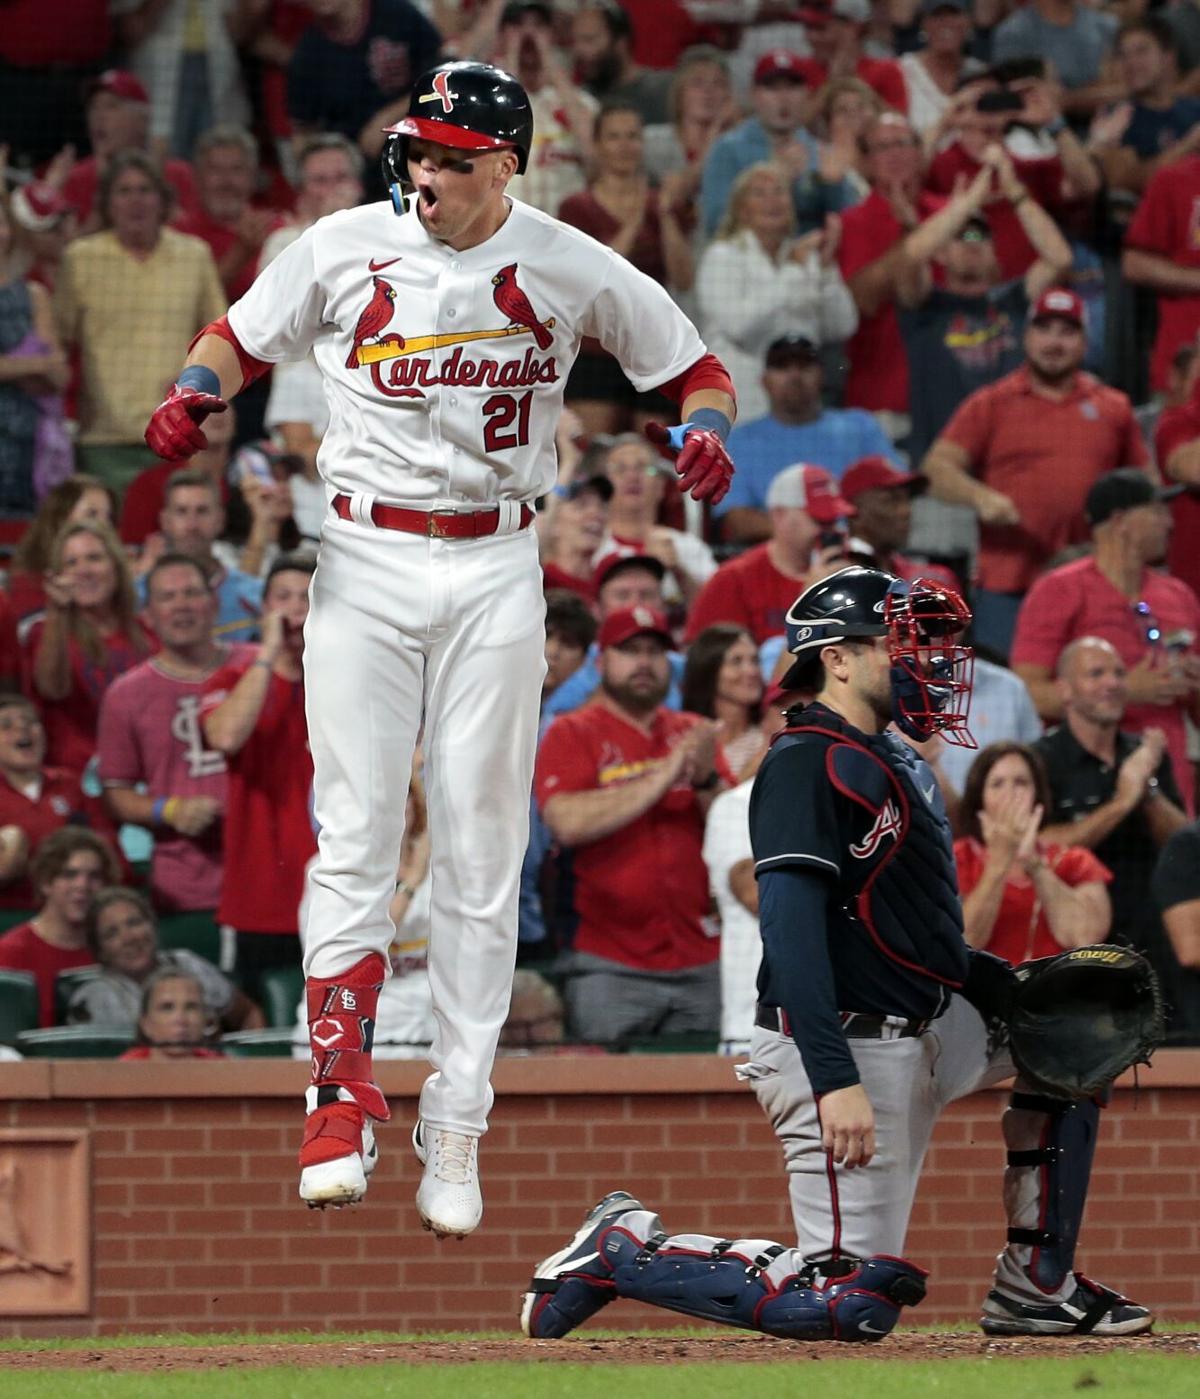 Sarah Anne ⚾️ on X: The Cardinals are undefeated since I started a Yadi  chant in my Saturday cream Yadi jersey at Busch Stadium on a Saturday with  Yadi at the plate